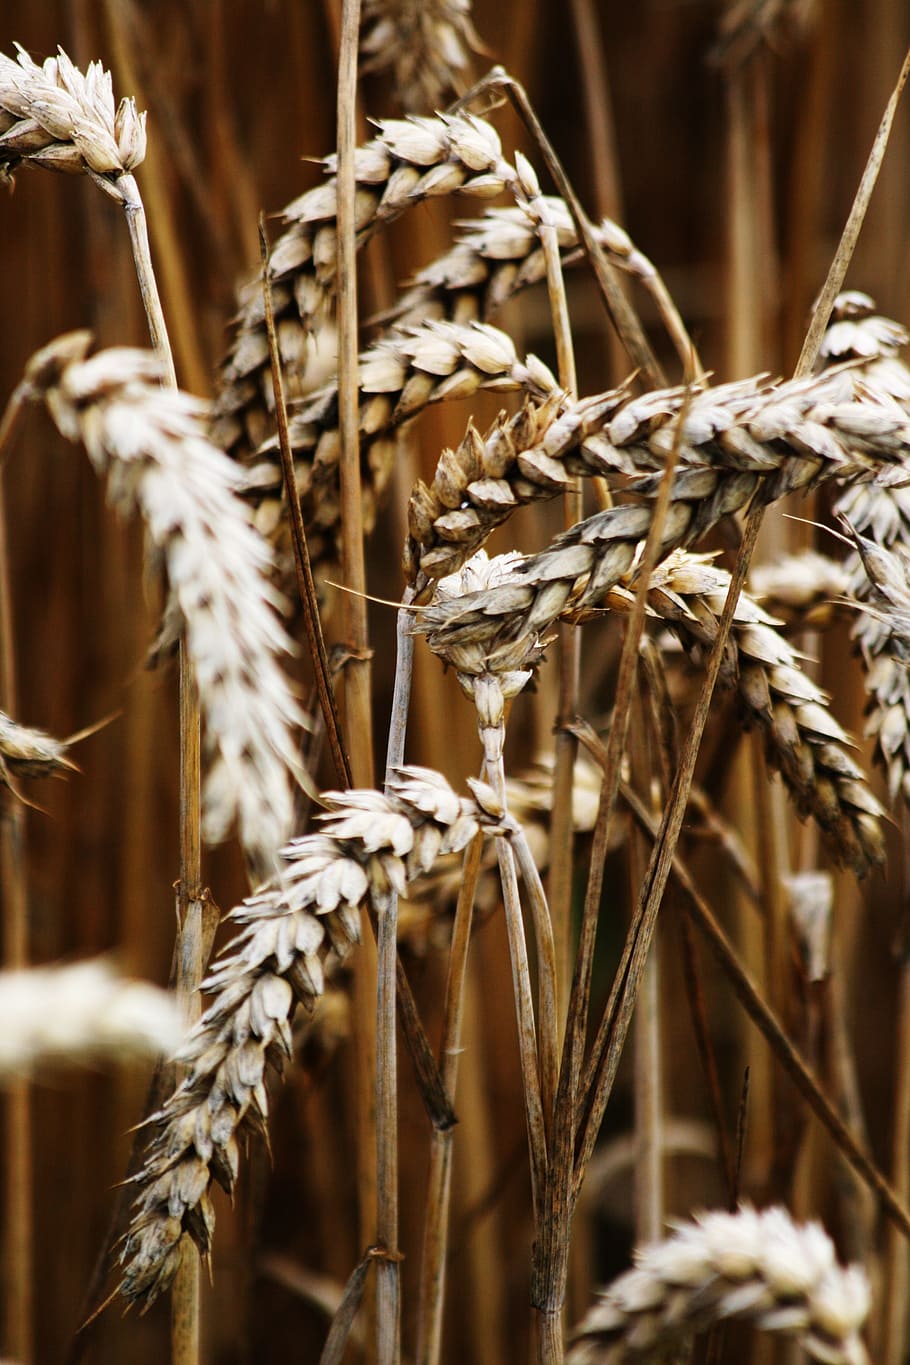 cereals, harvest, wheat, nature, grain, wheat field, golden yellow, ear, crop, plant